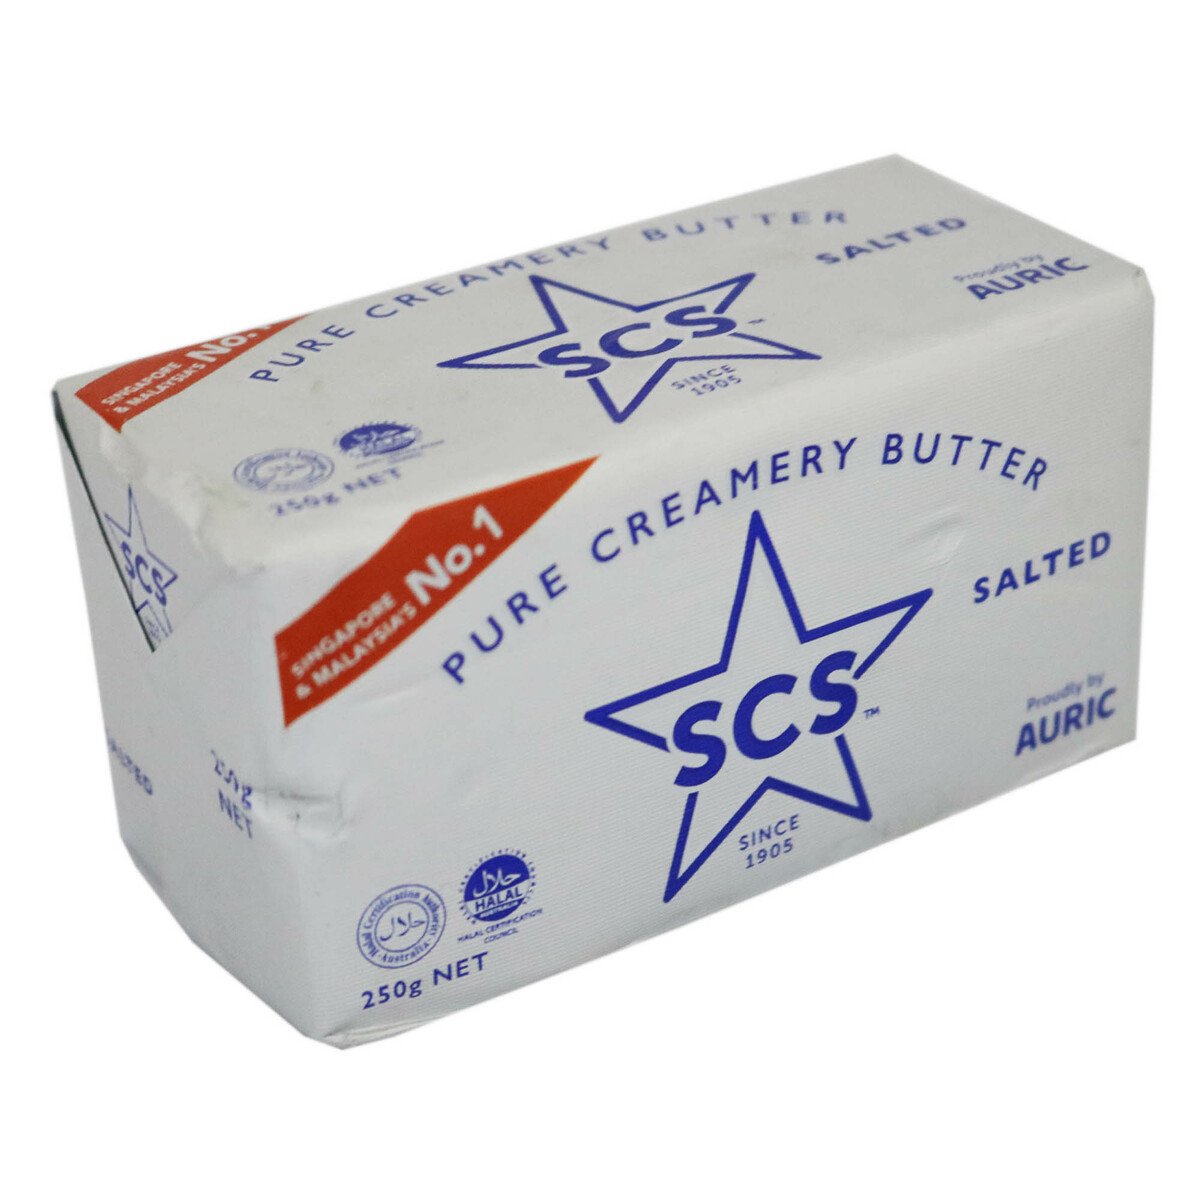 Scs Salted Butter 227g